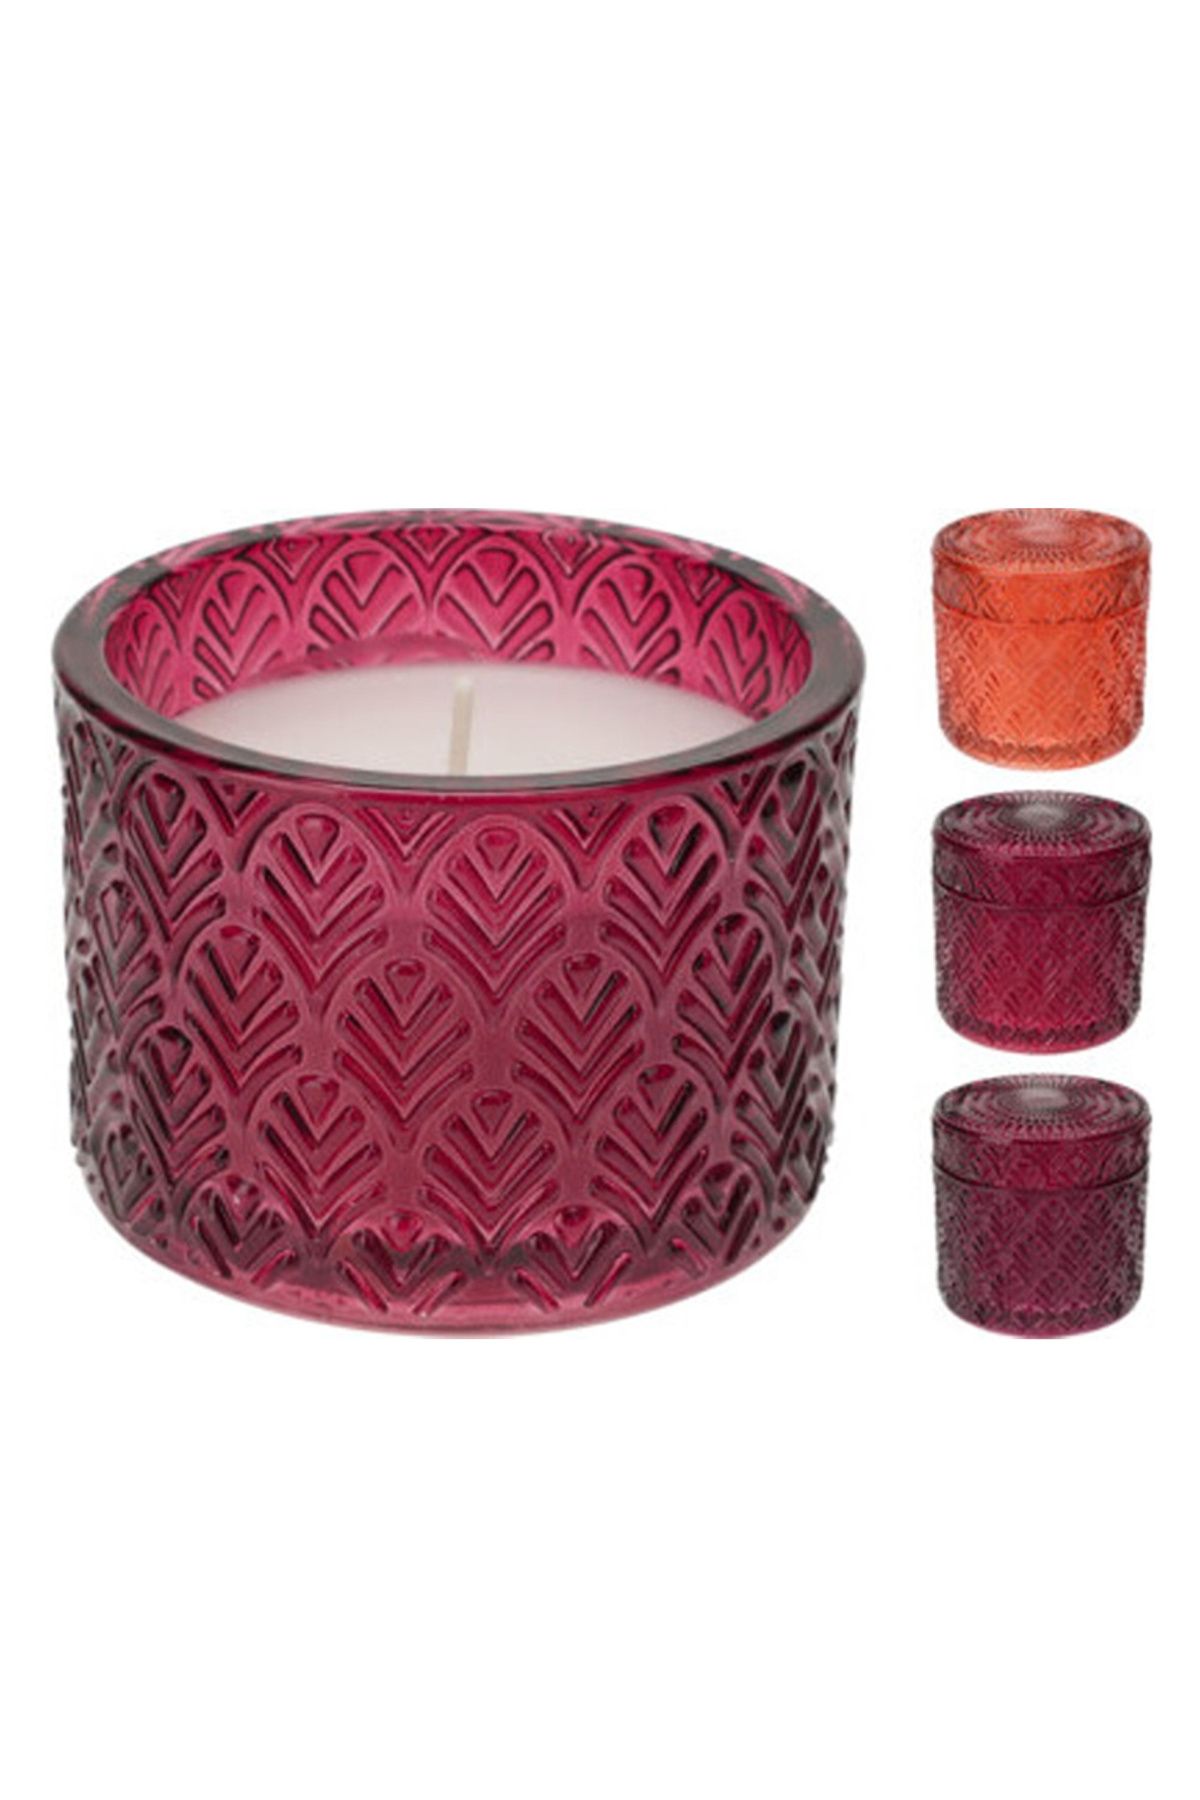 BOYNER EVDE Mum SCENTED CANDLE IN GLASS 8CM 3A 1